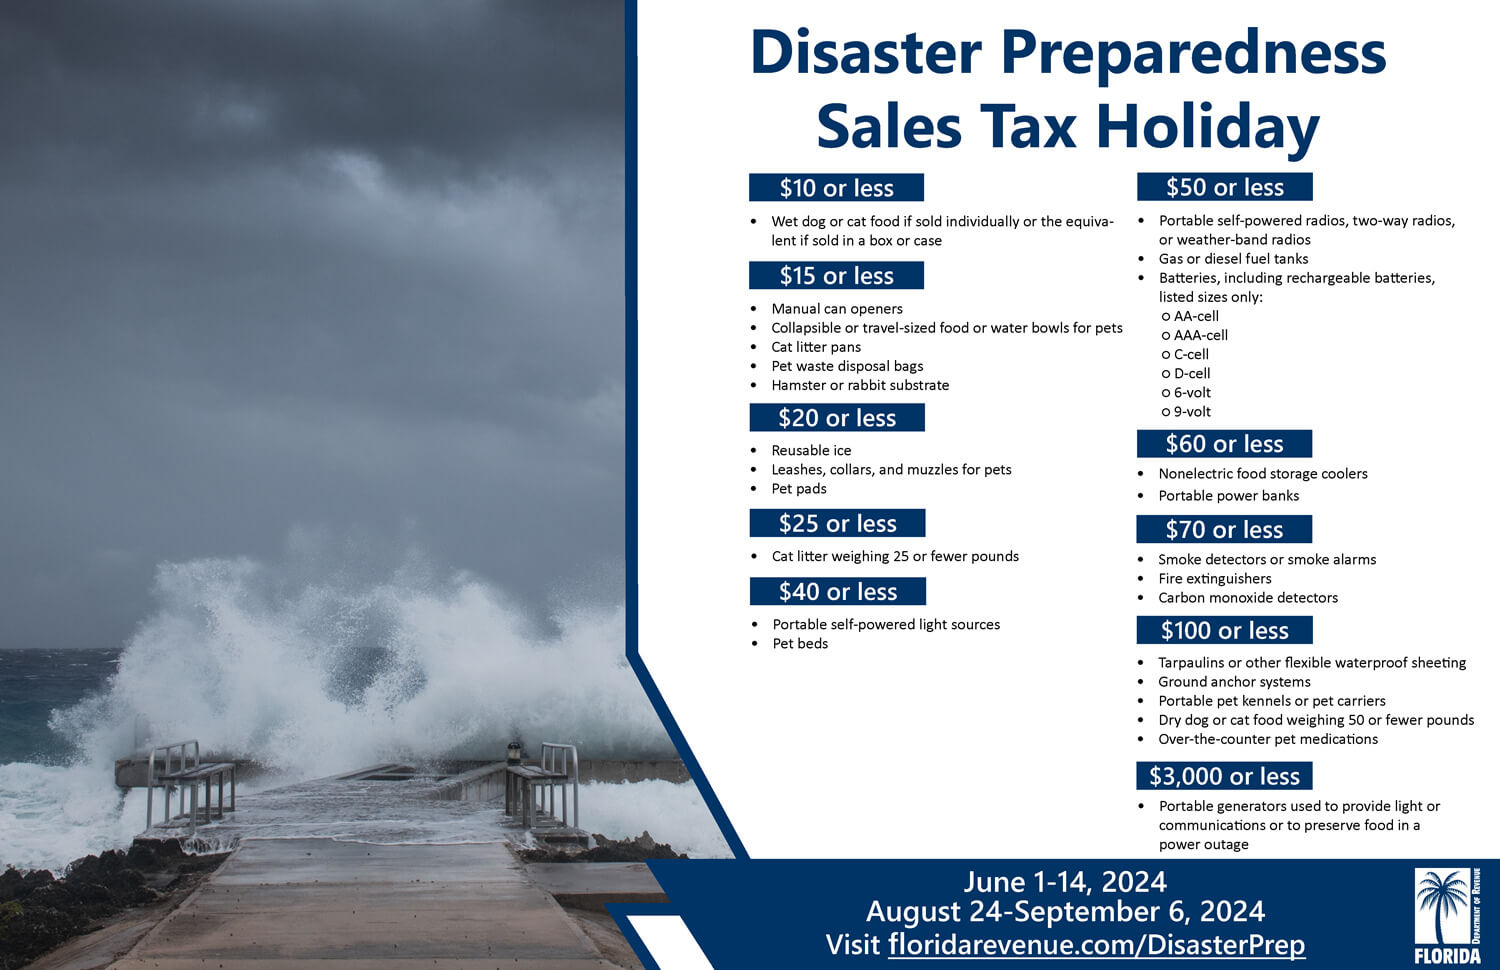 Disaster Preparedness Sales Tax Holiday flyer